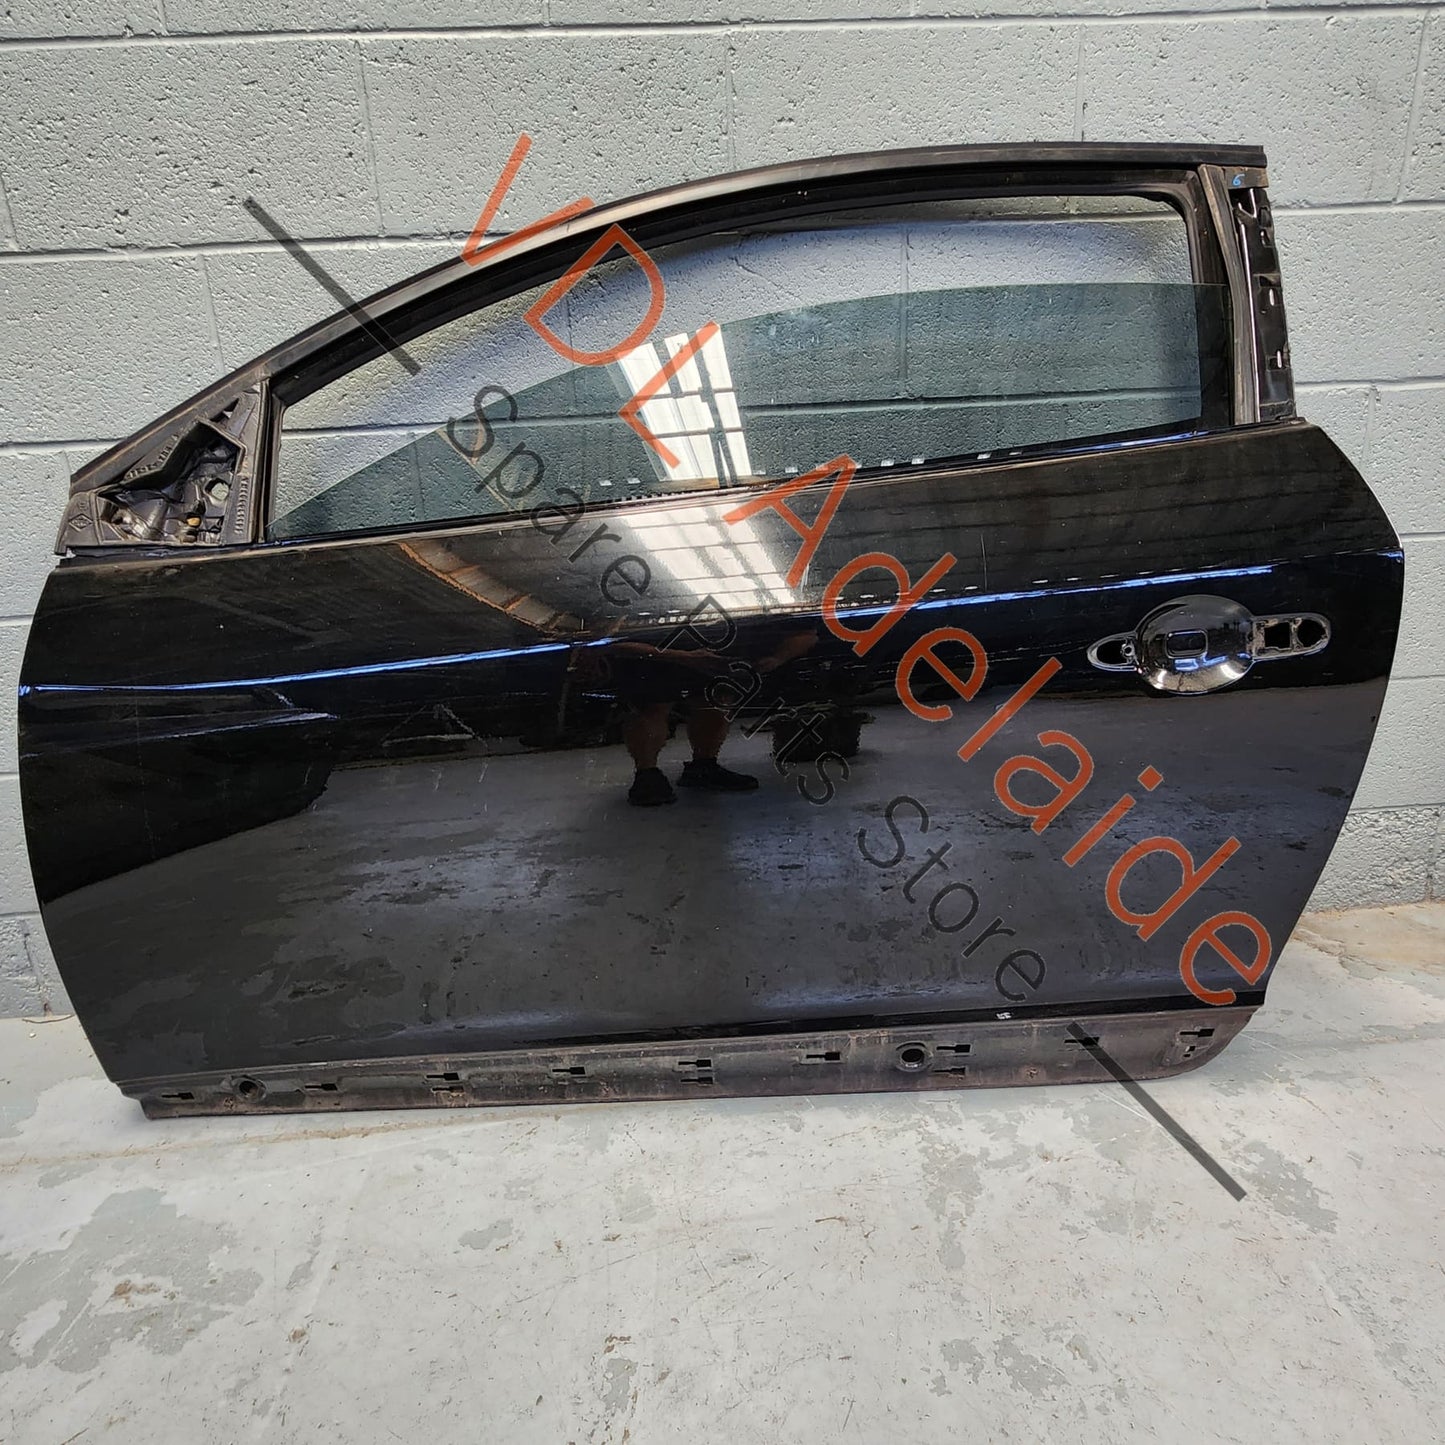 801015283R803014156R Renault Megane RS250 RS265 RS275 Front Left Door Shell Panel 801015283R w Glass 803014156R